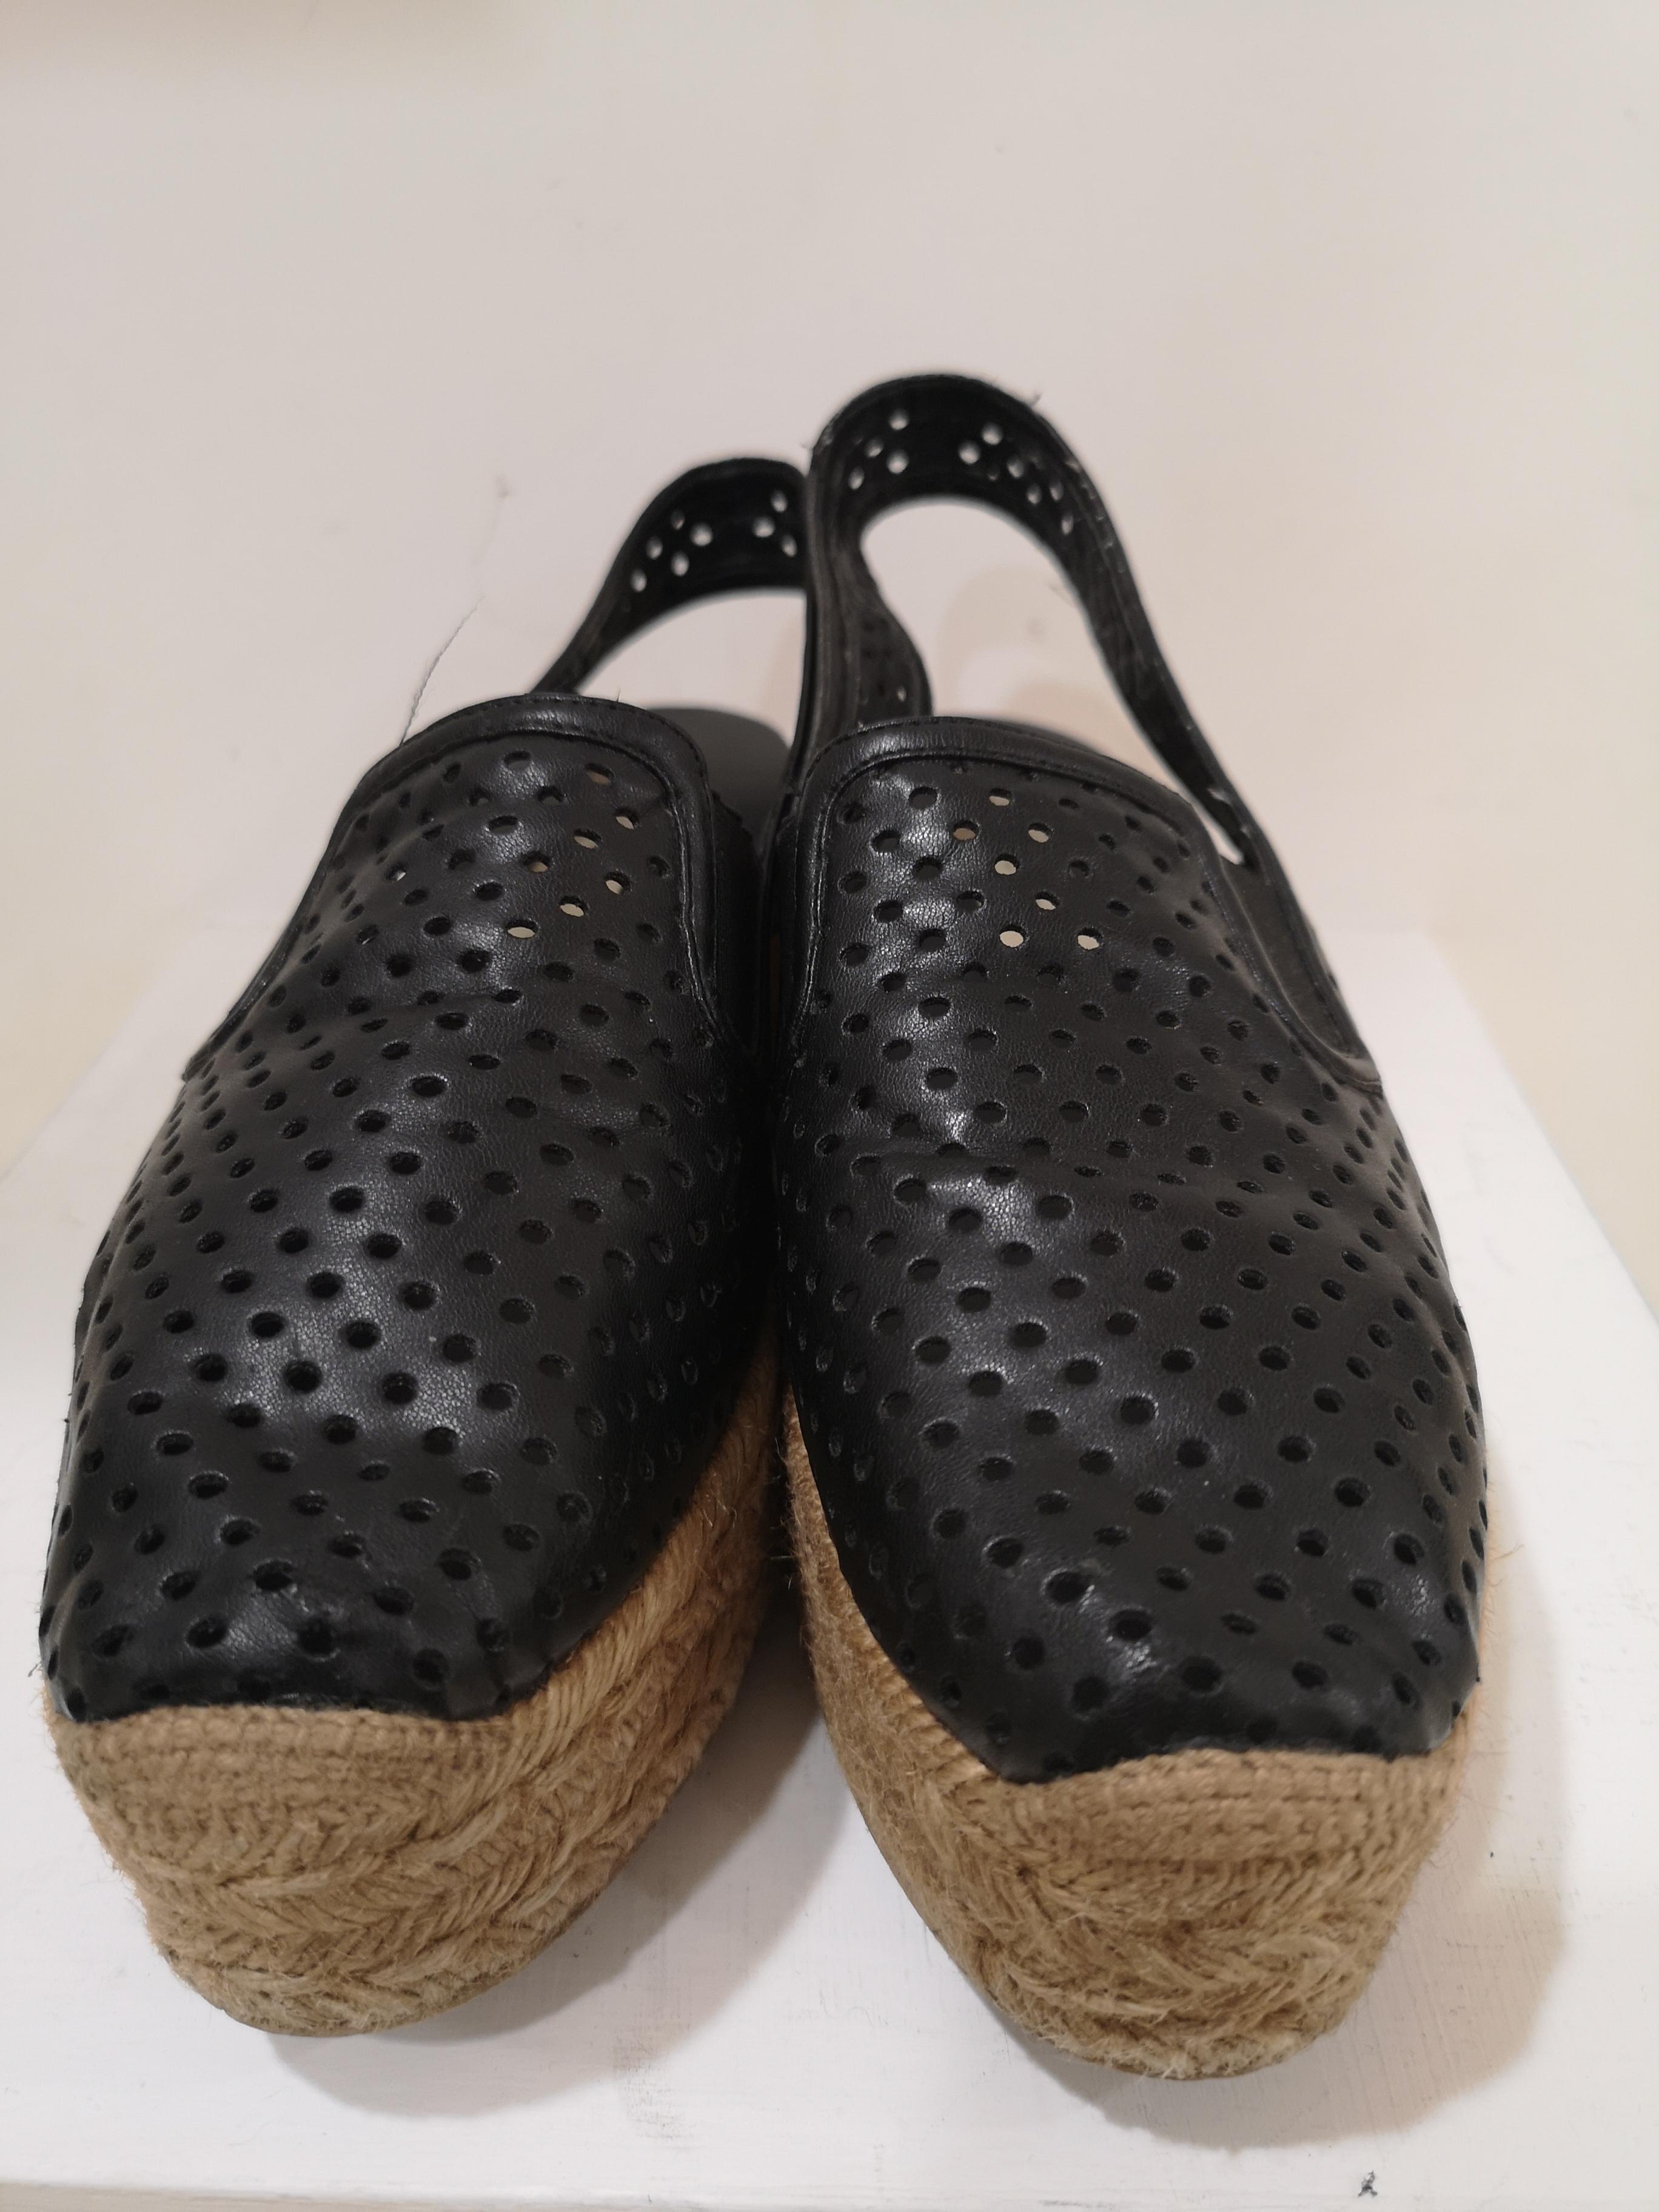 Stella McCartney Black Shoes
perforater eco leather size 39